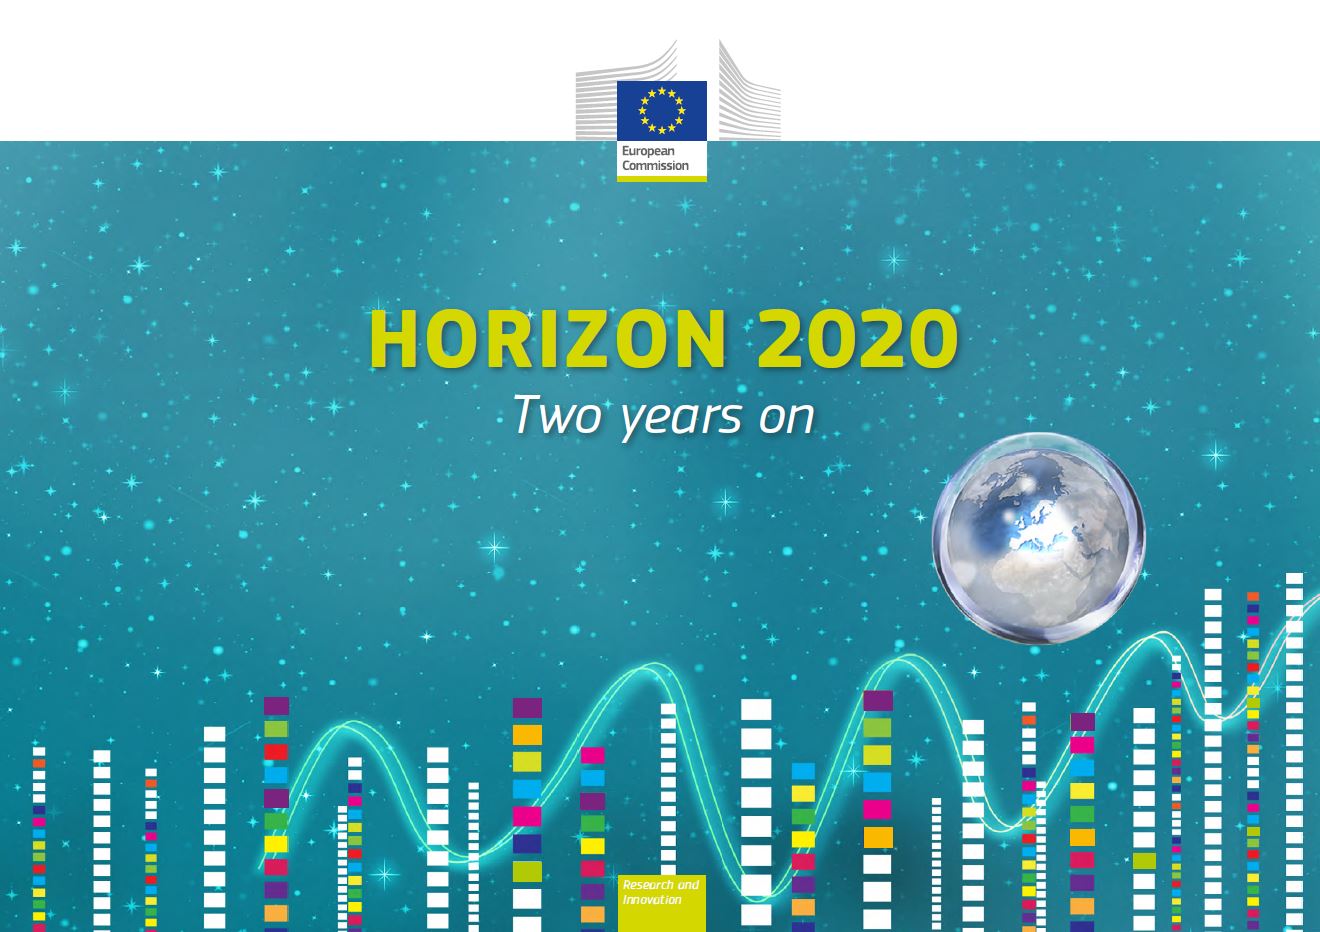 H2020-Two years on